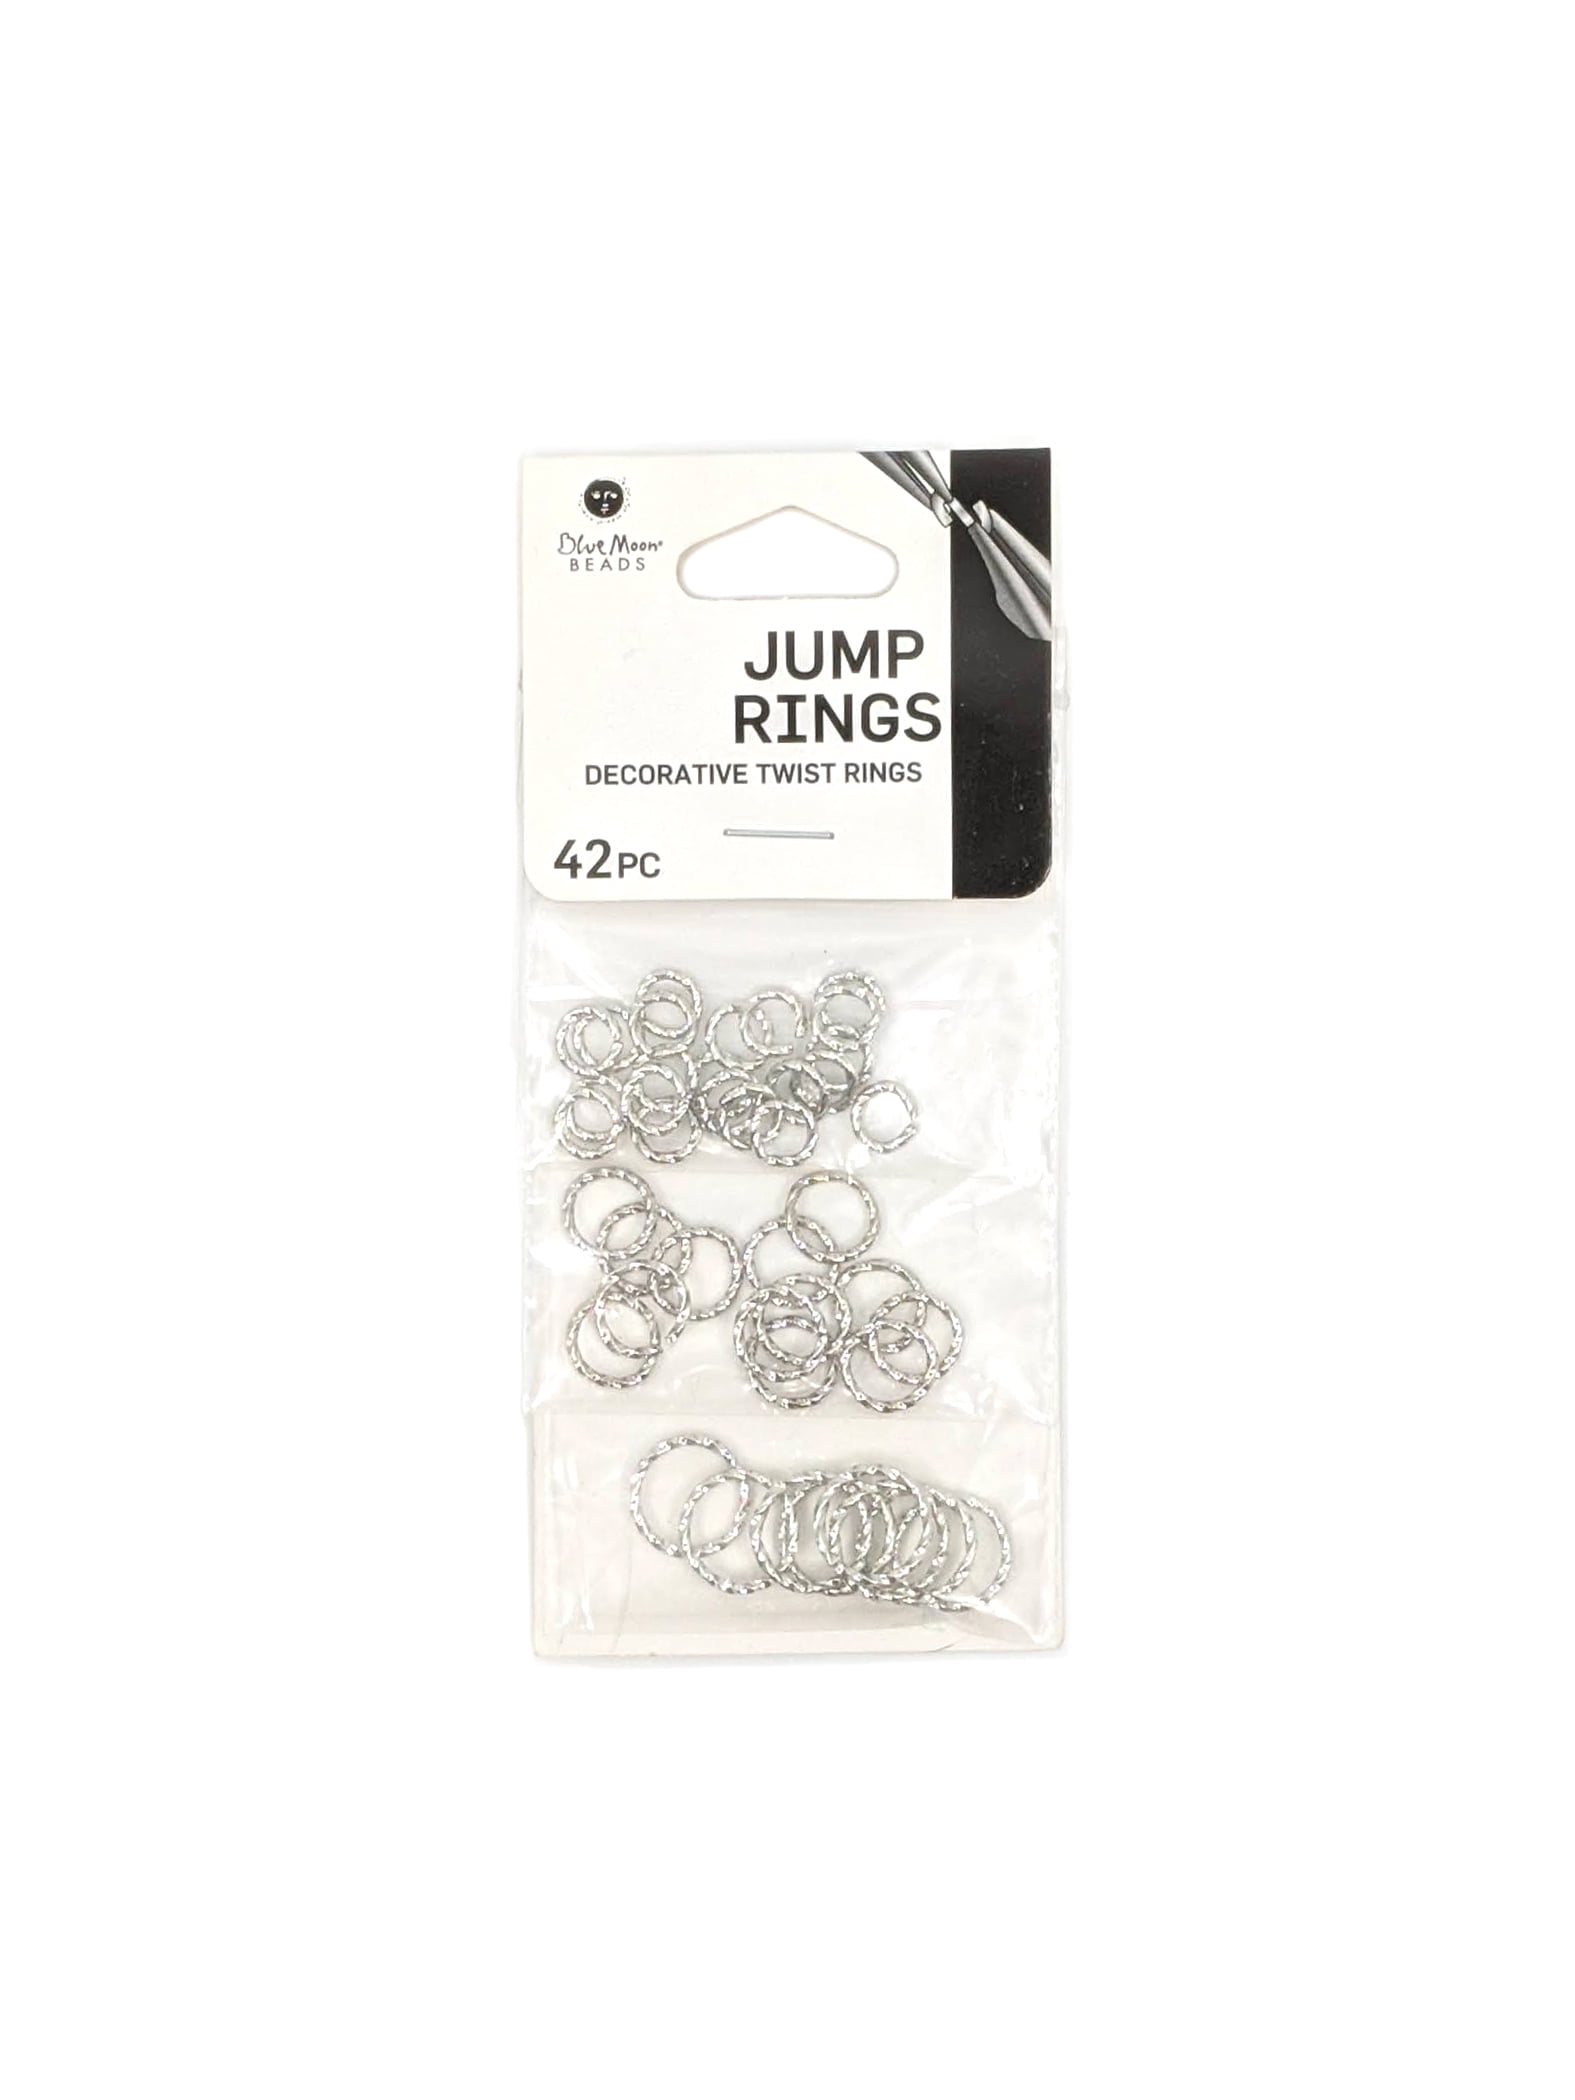 Blue Moon Beads Silver Metal Jump Rings for Jewelry Making, 42 Piece